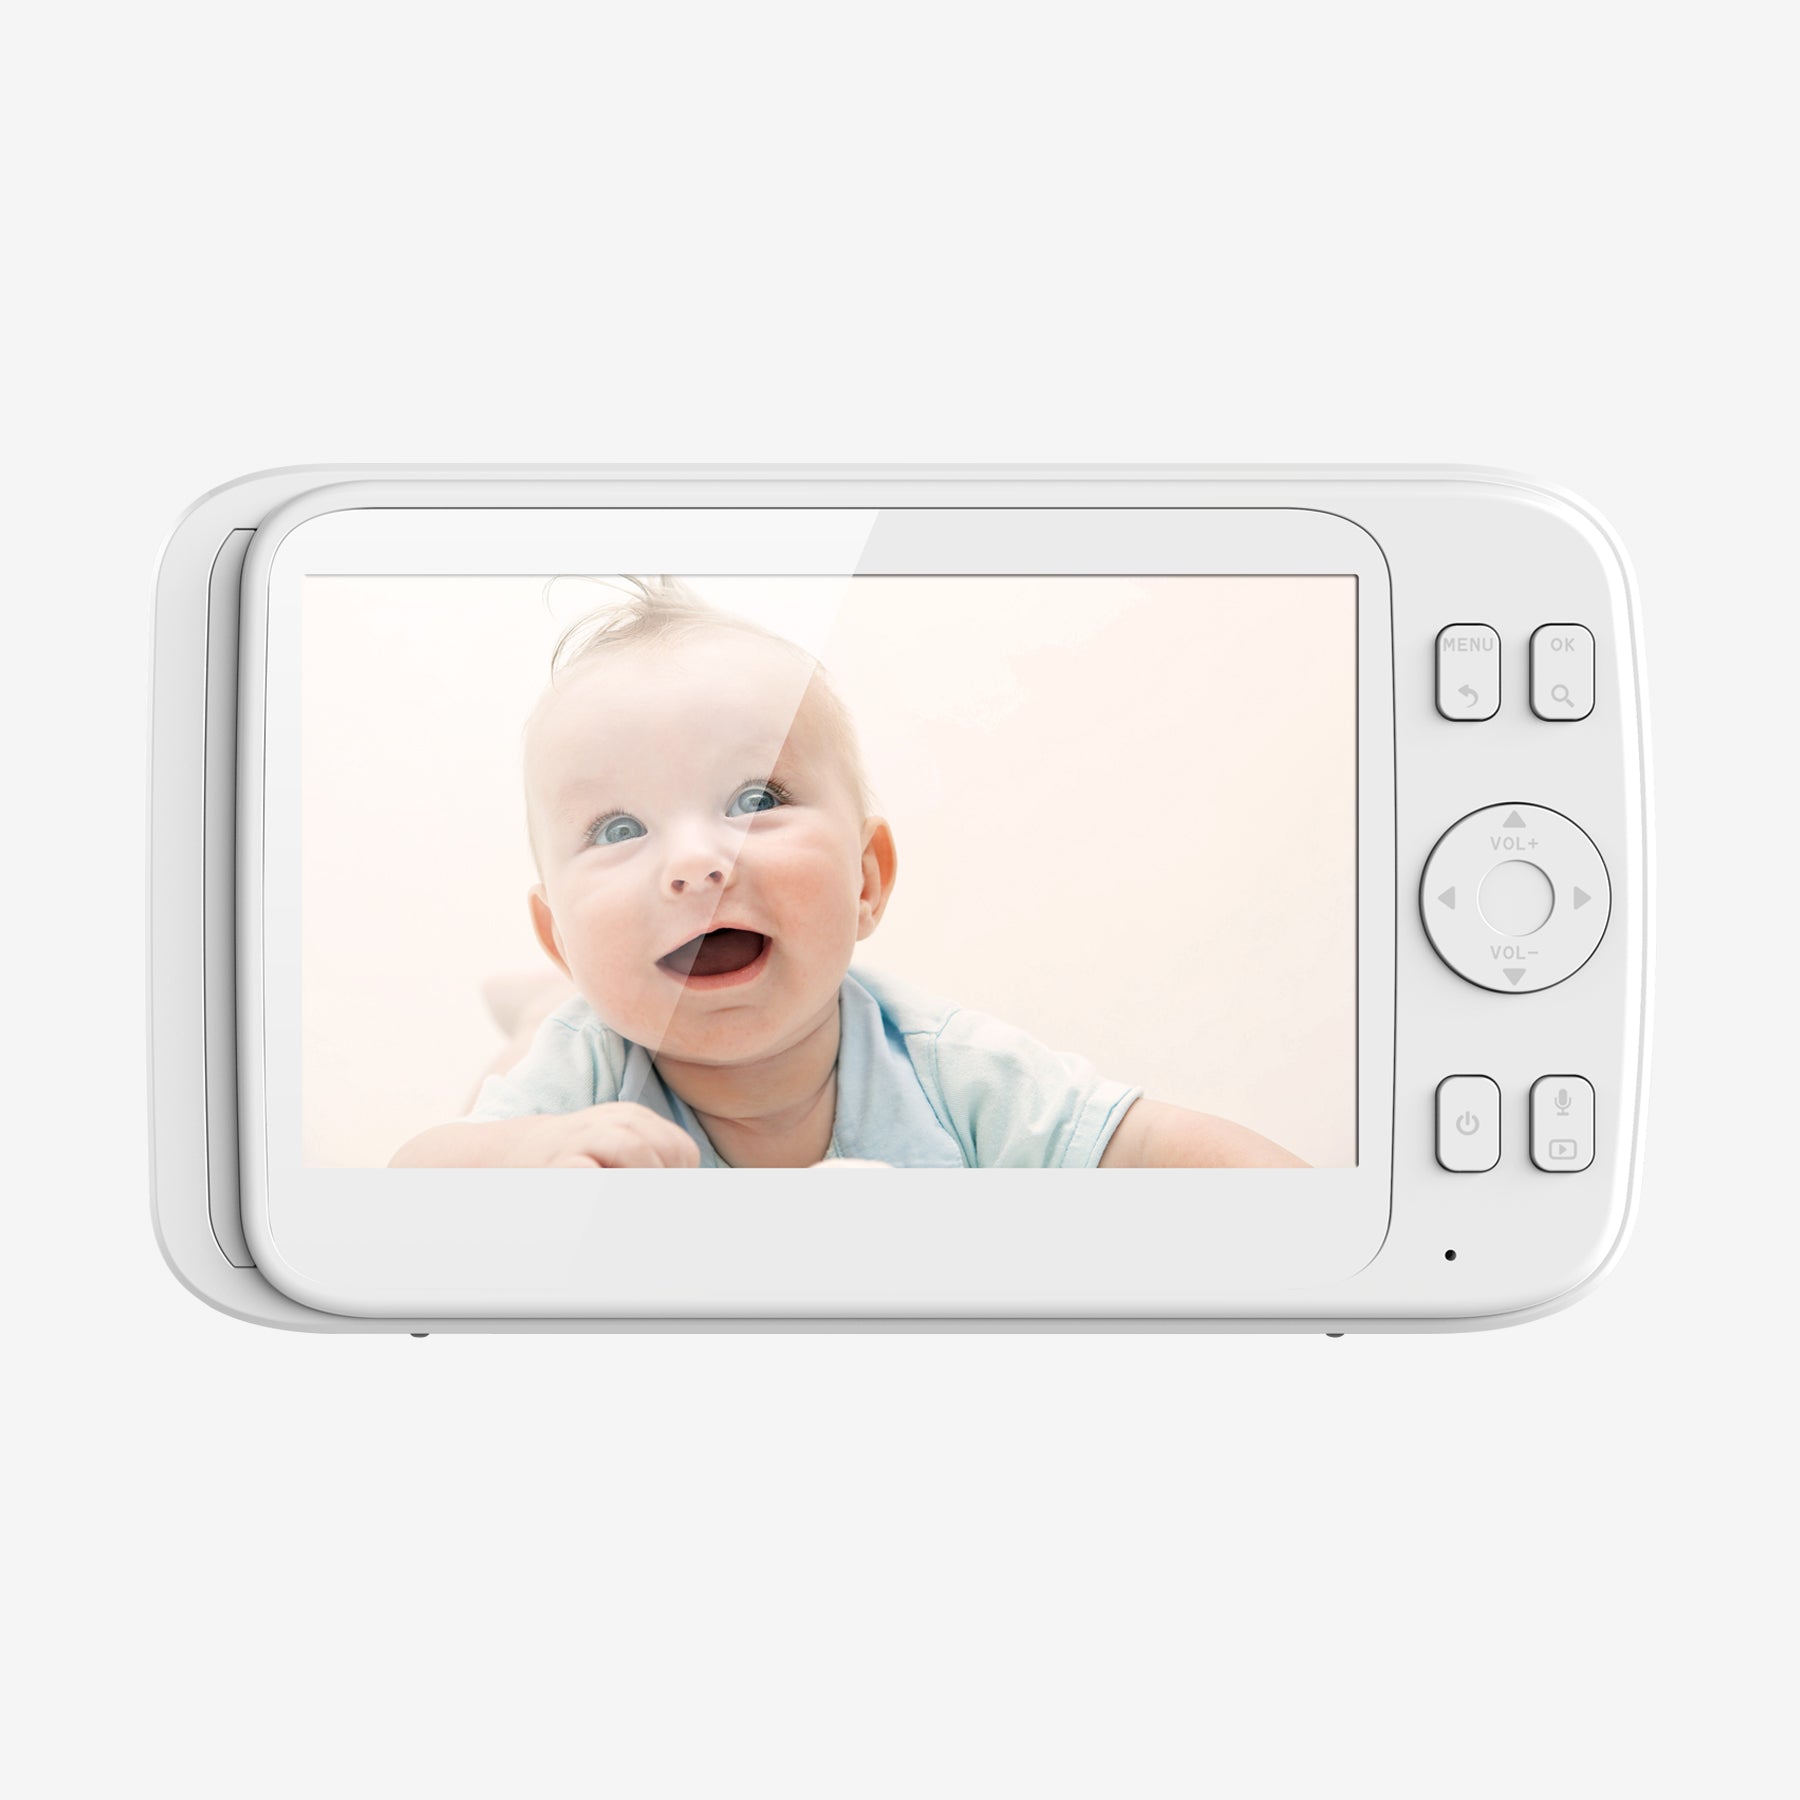 DC-508 Video Baby Monitor